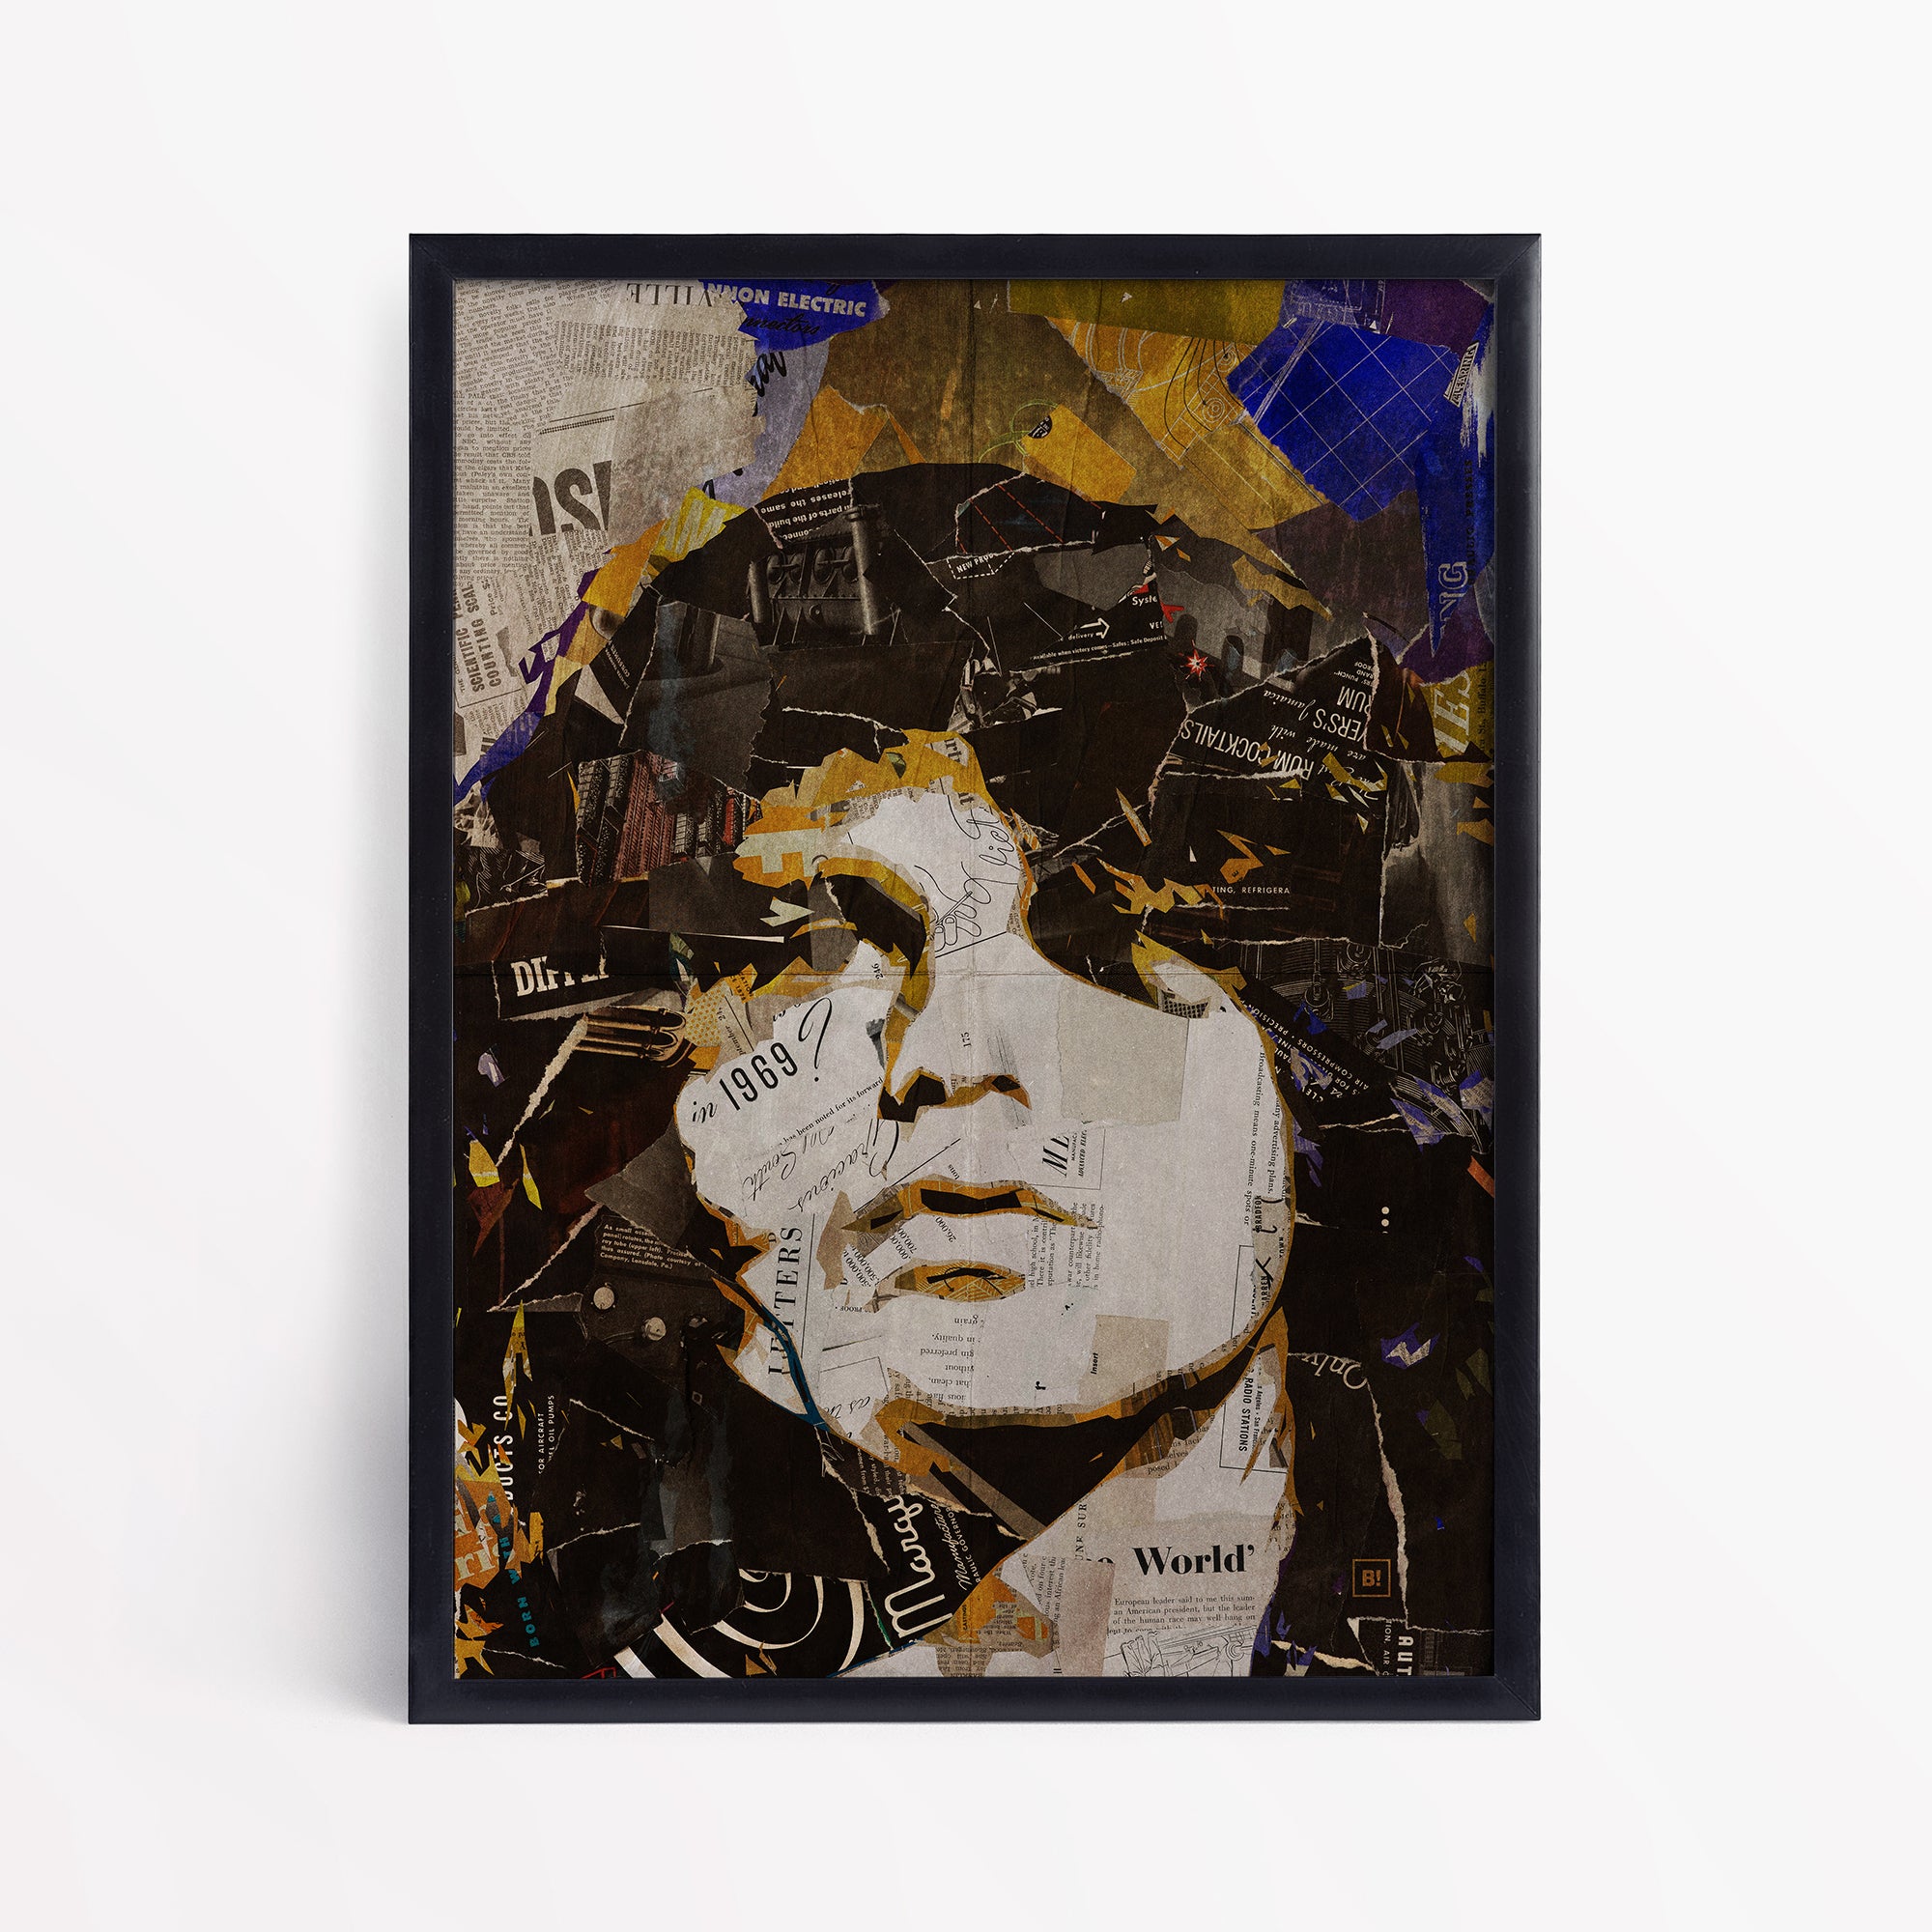 Be inspired by our iconic collage portrait art print of Jim Morrison. This artwork has been printed using the giclée process on archival acid-free paper and is presented in a sleek black frame, showcasing its timeless beauty in every detail.